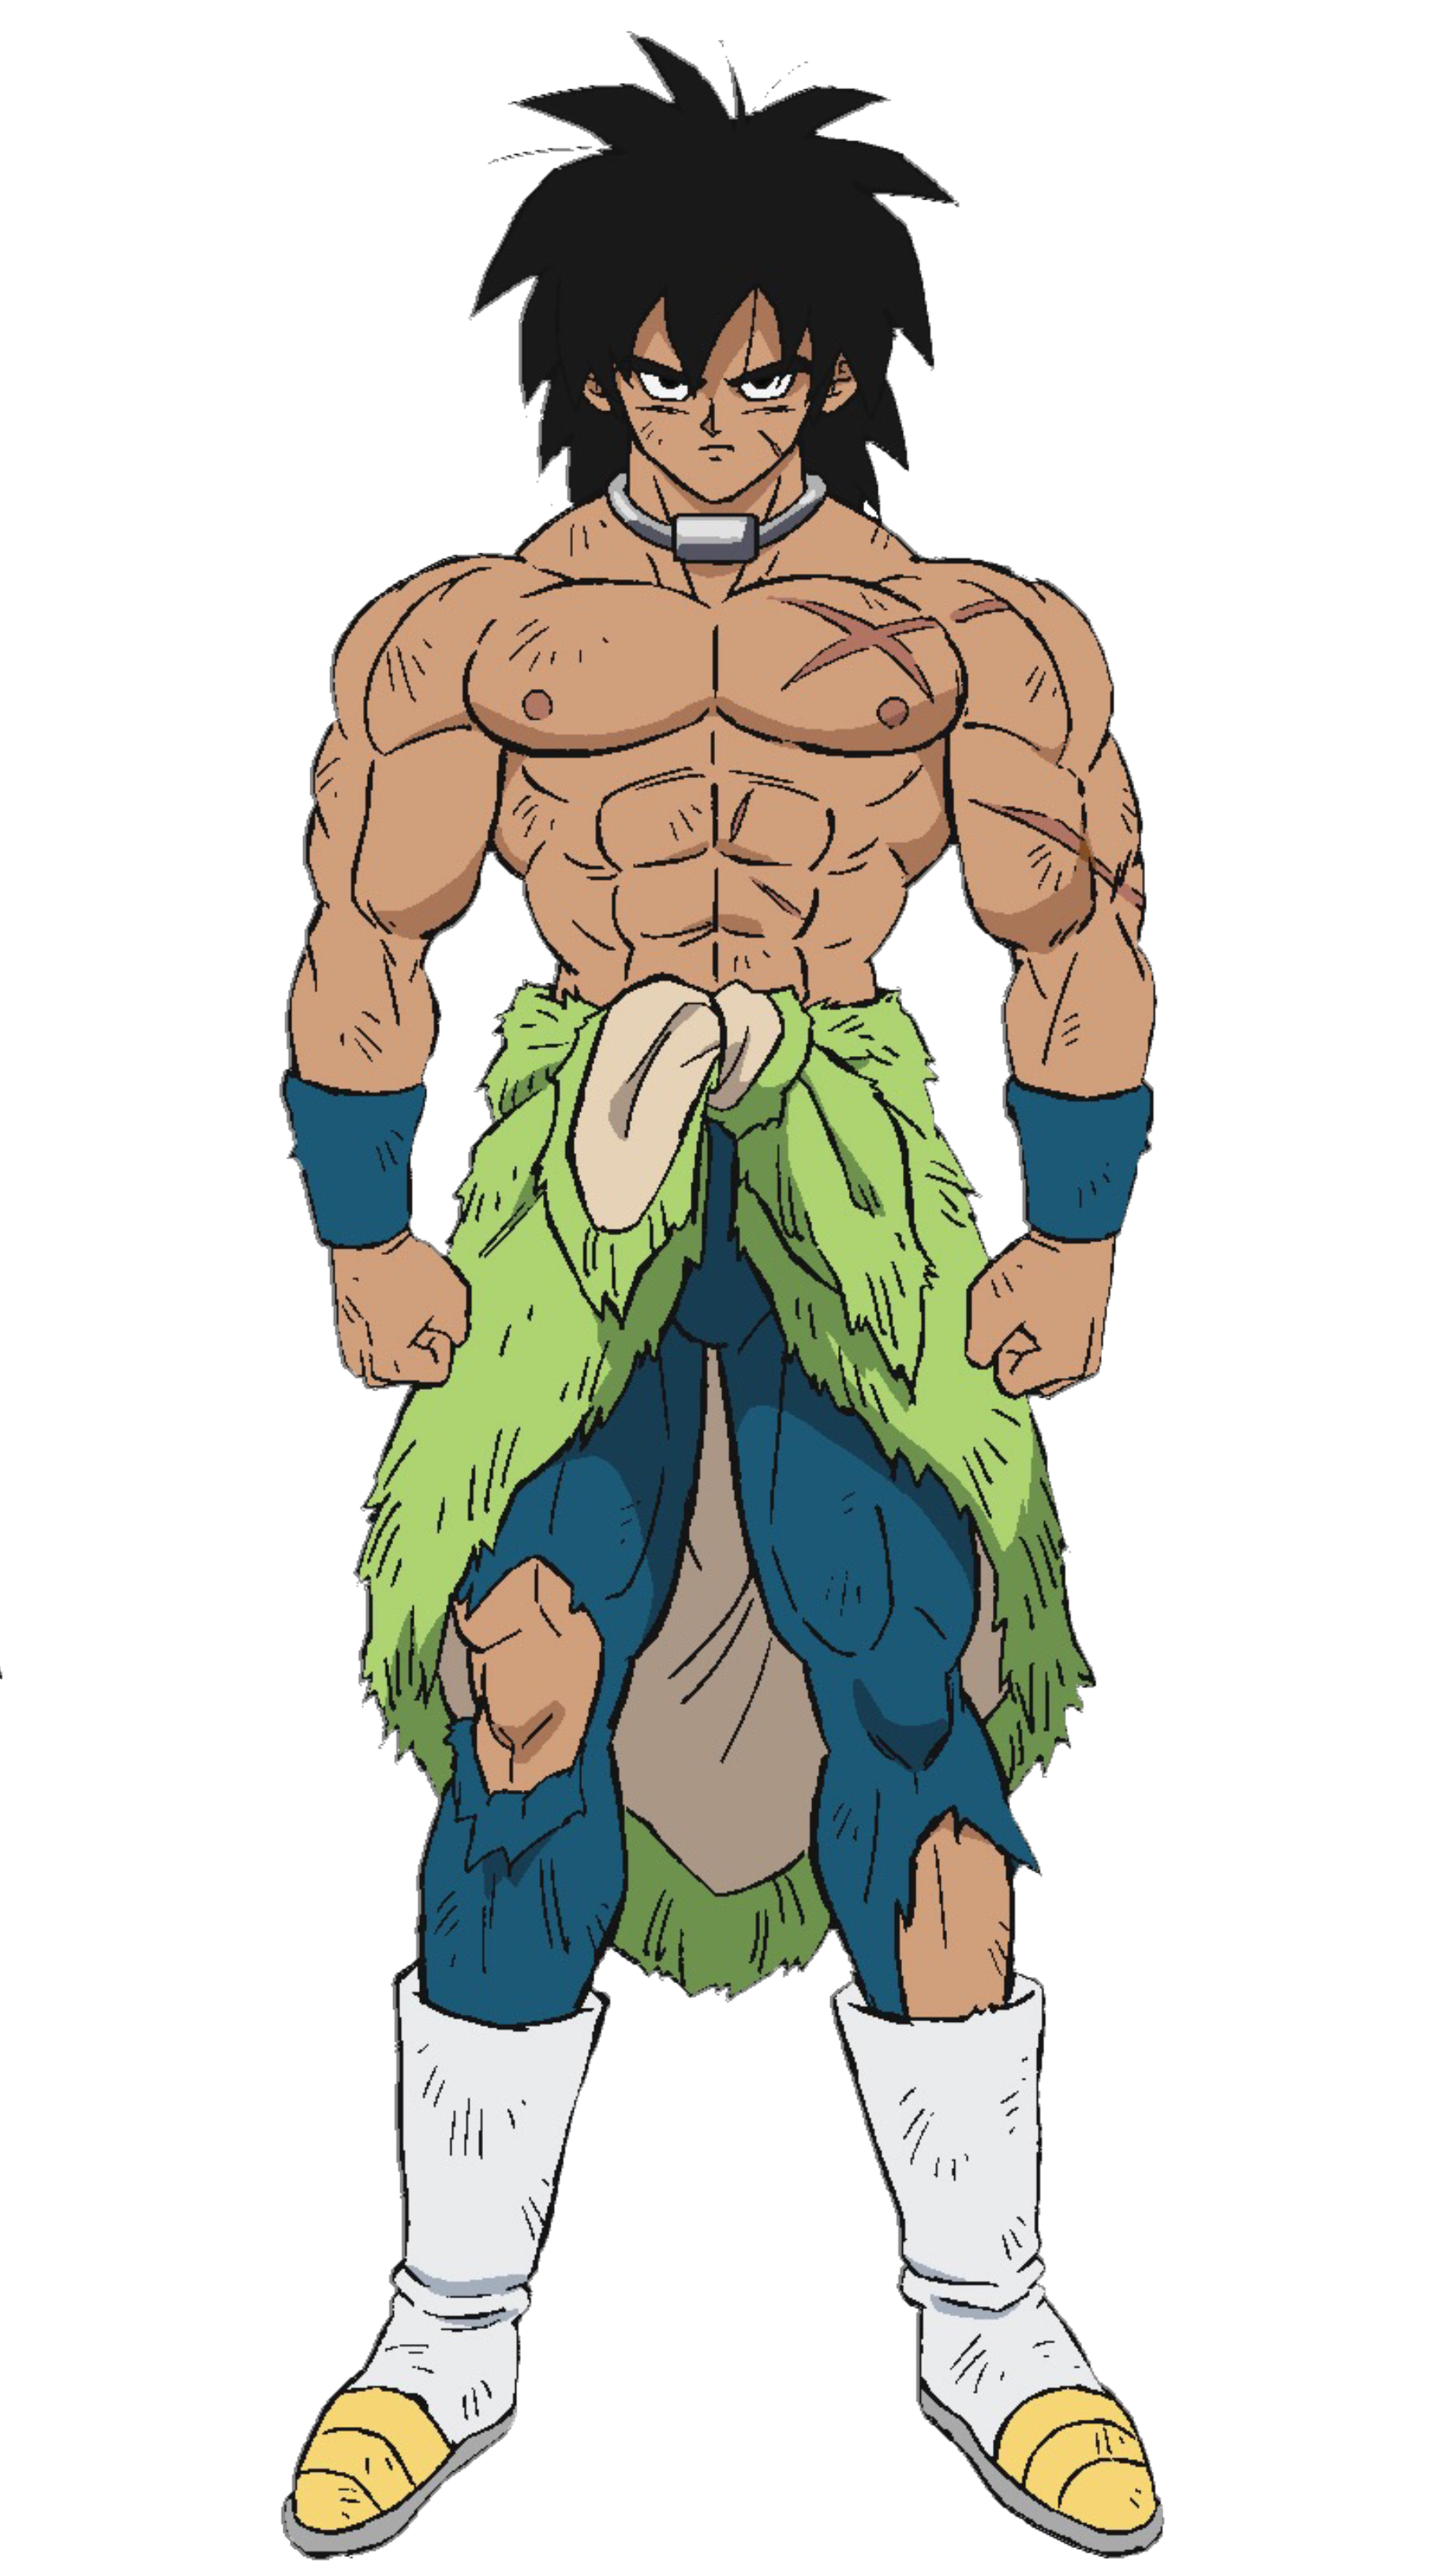 Image - Broly Dragon Ball Super.png | Fictional Battle Omniverse Wiki | FANDOM powered by Wikia